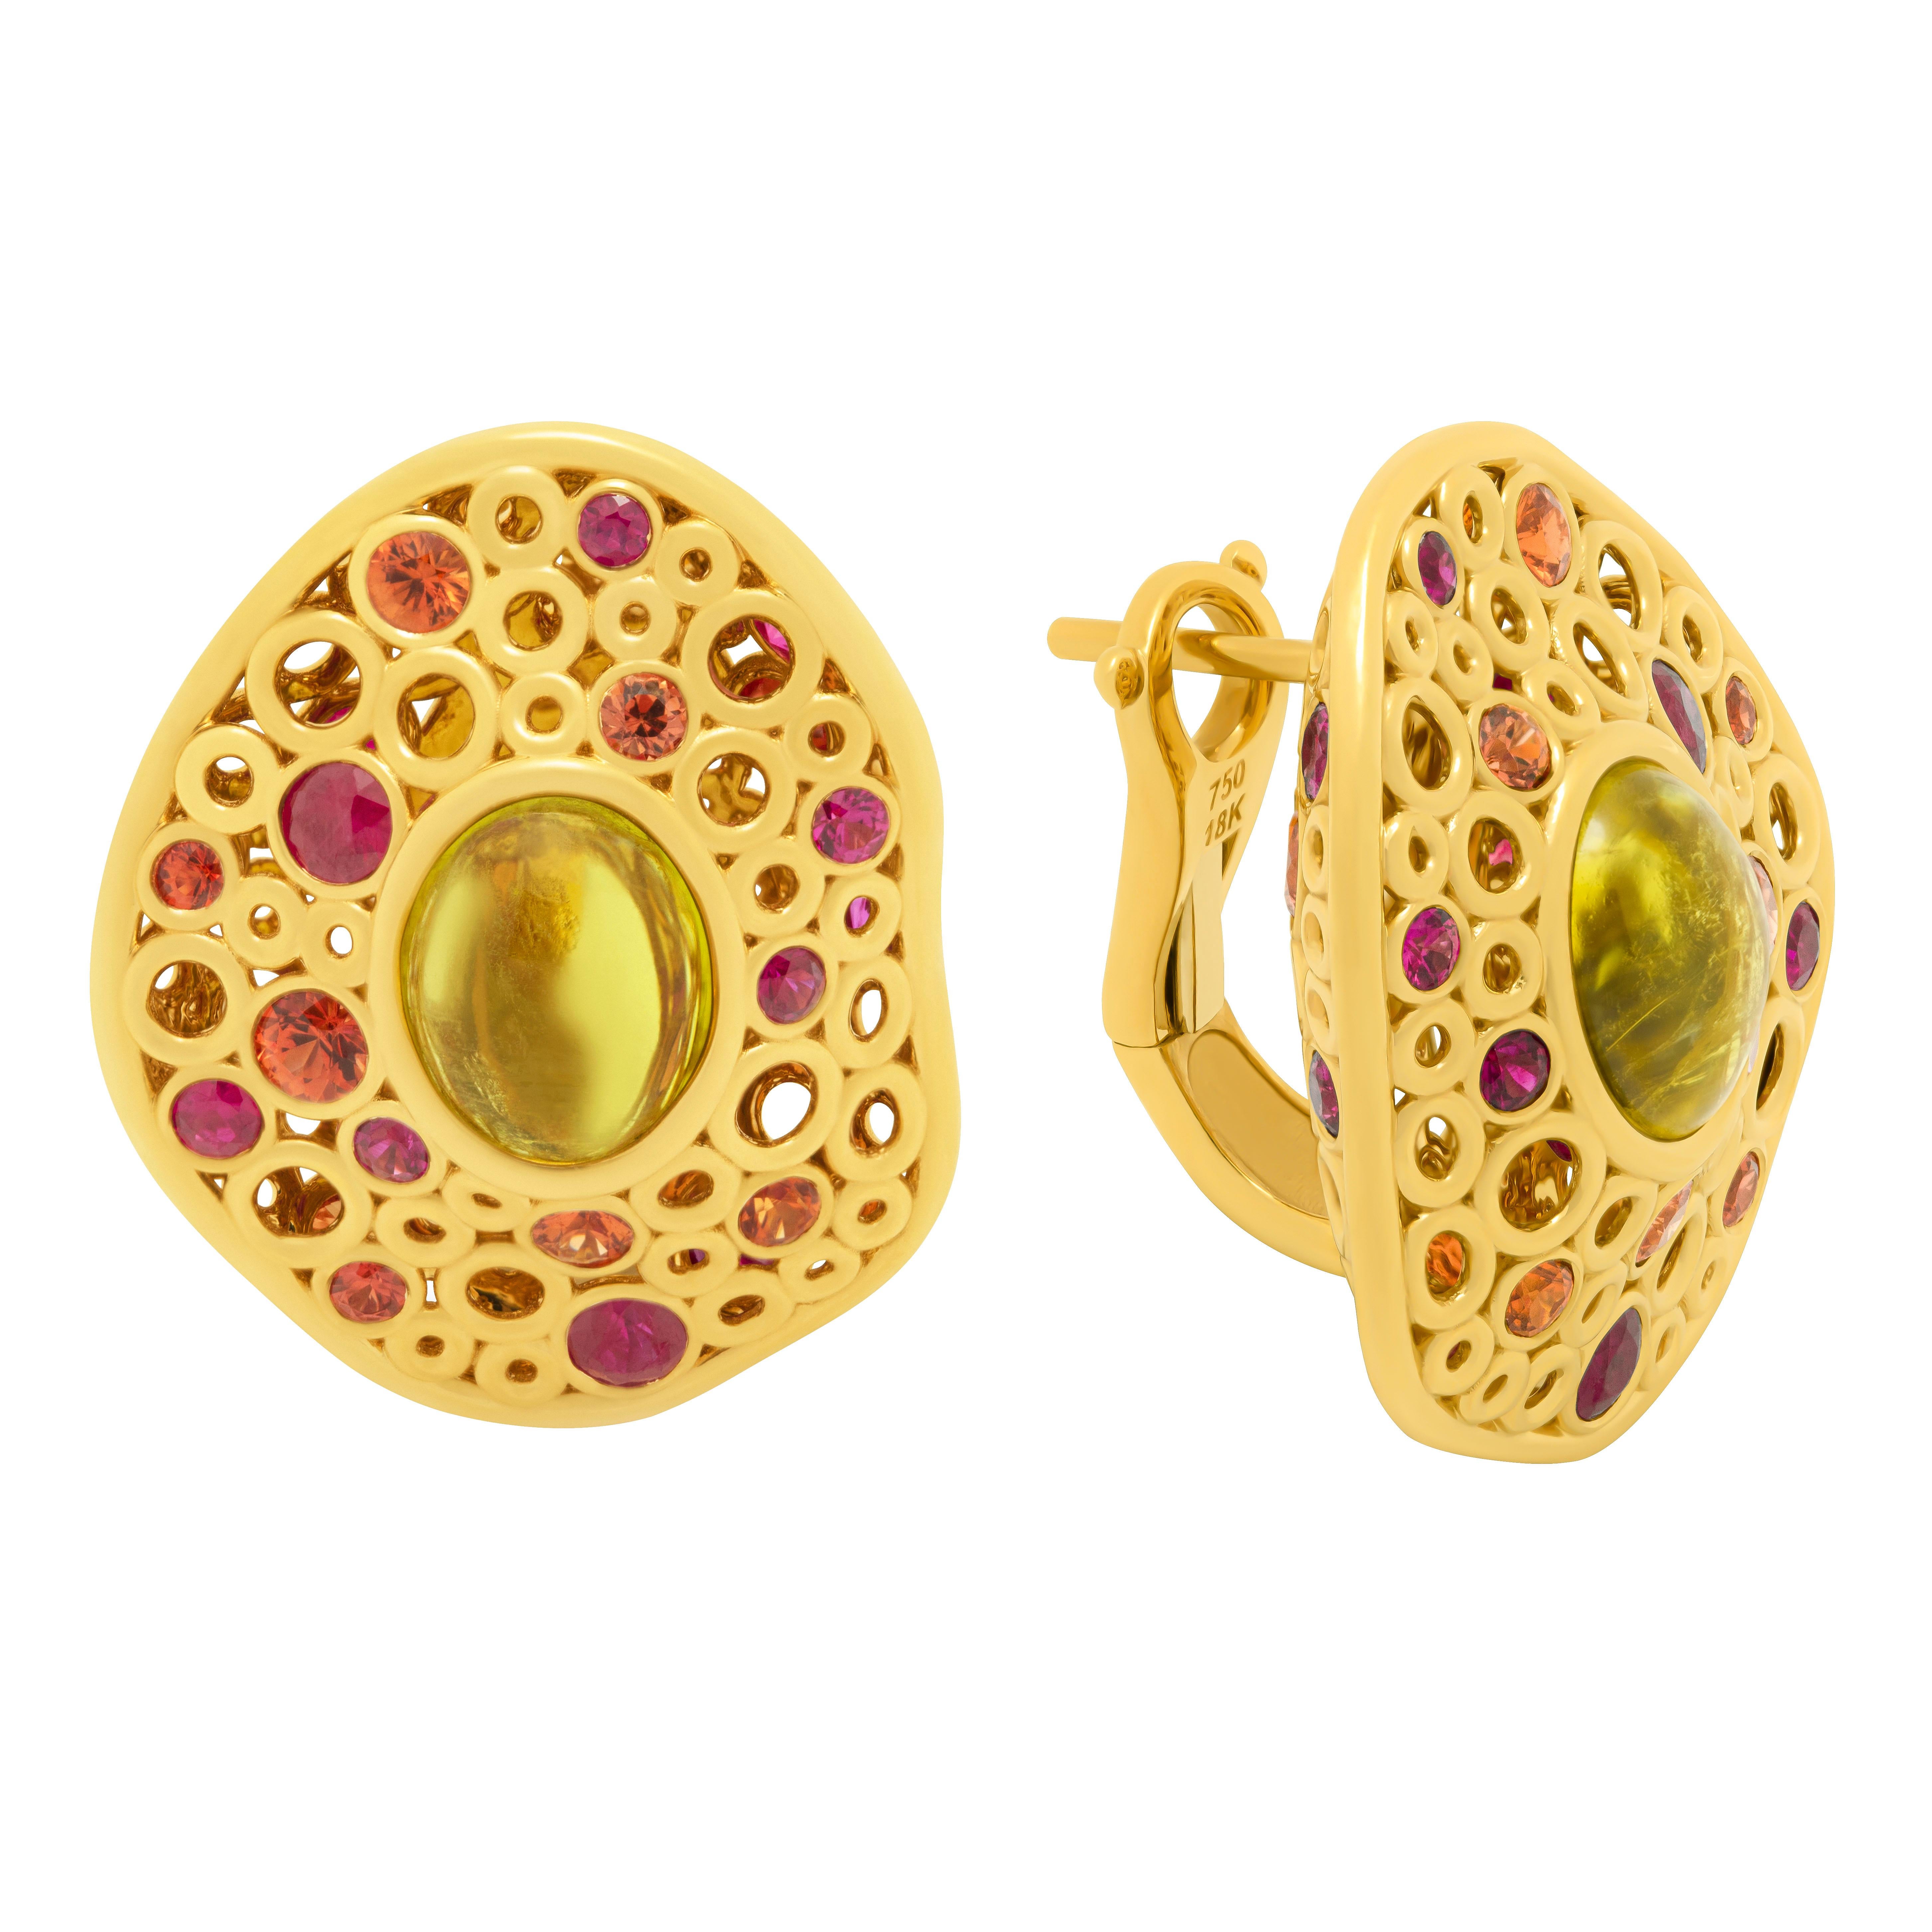 Canary Tourmaline 5.67 Carat Ruby Sapphires 18 Karat Yellow Gold Bubble Earrings
Incredibly light and airy Earrings from our Bubbles Collection. Yellow 18 Karat Gold is made in the form of variety of small bubbles, some of which have 22 Orange